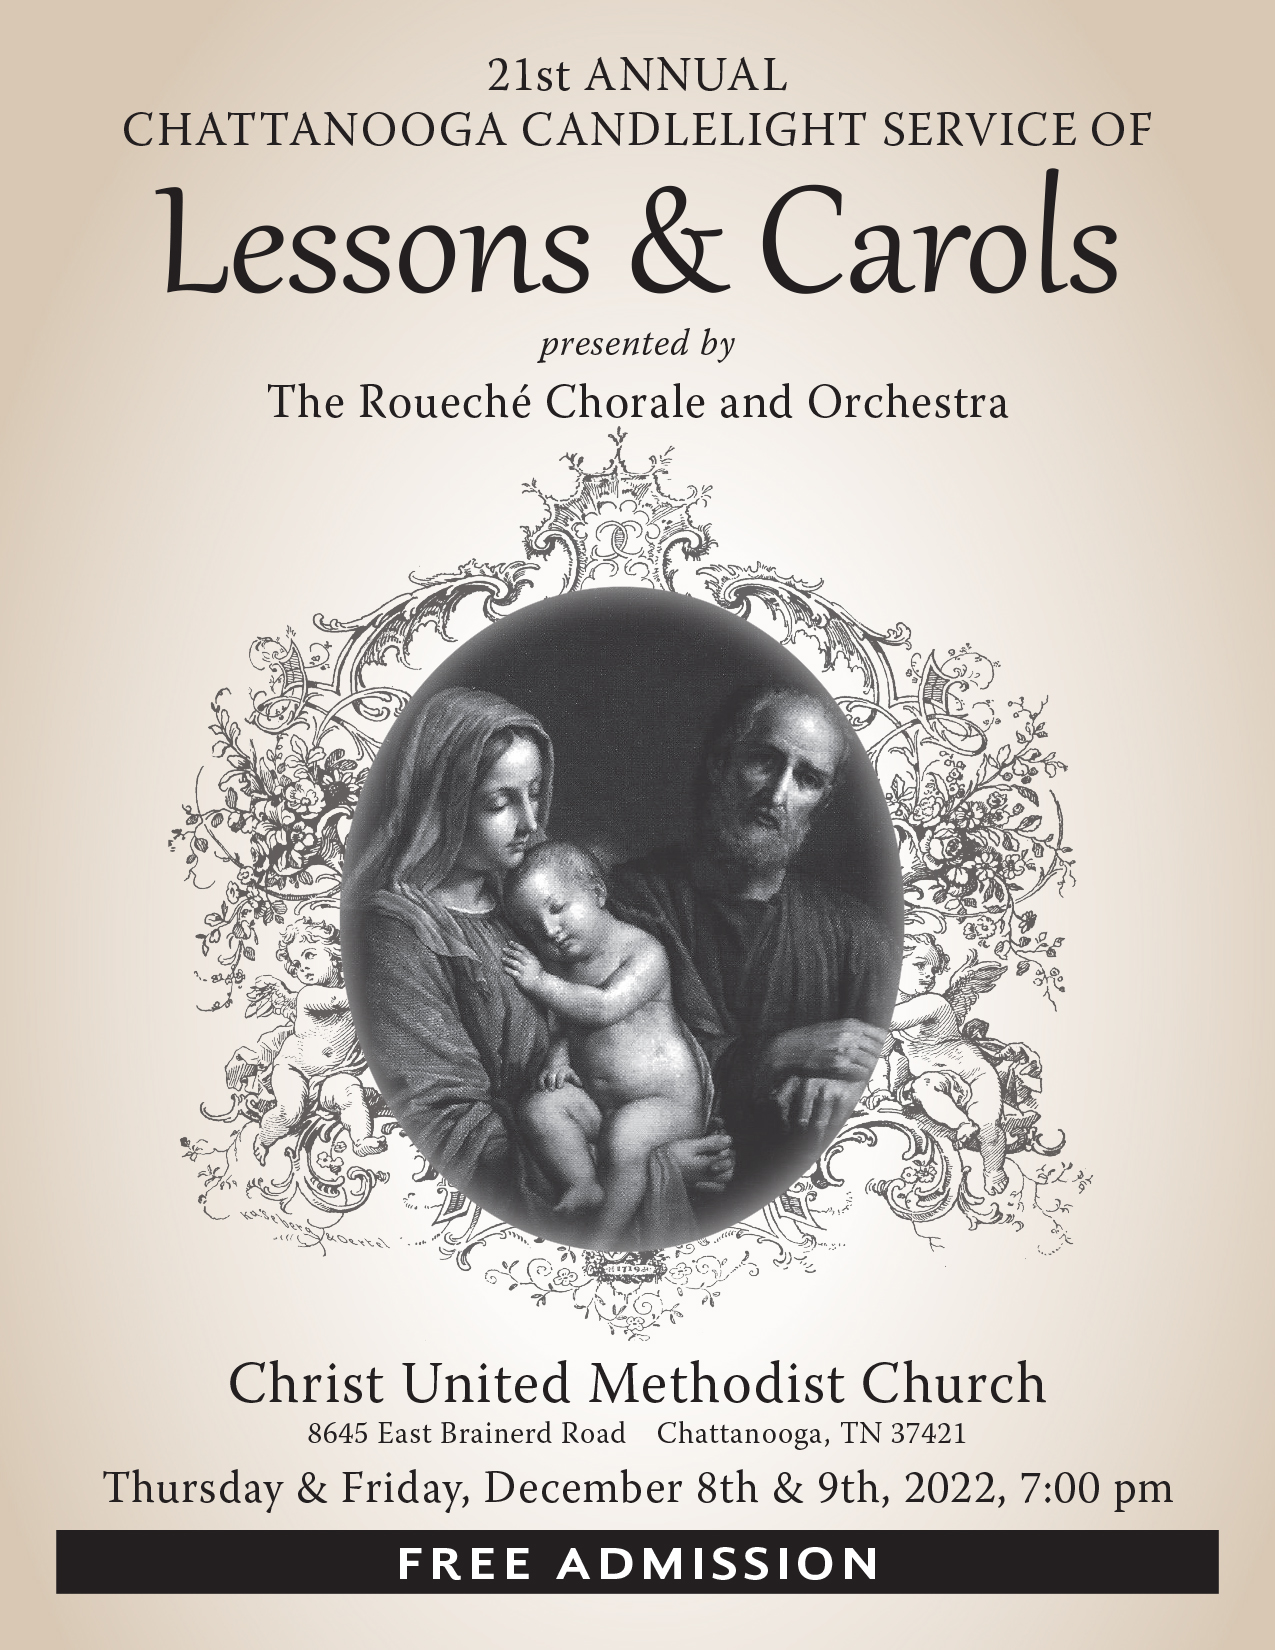 The Chattanooga Candlelight Service of Lessons & Carols